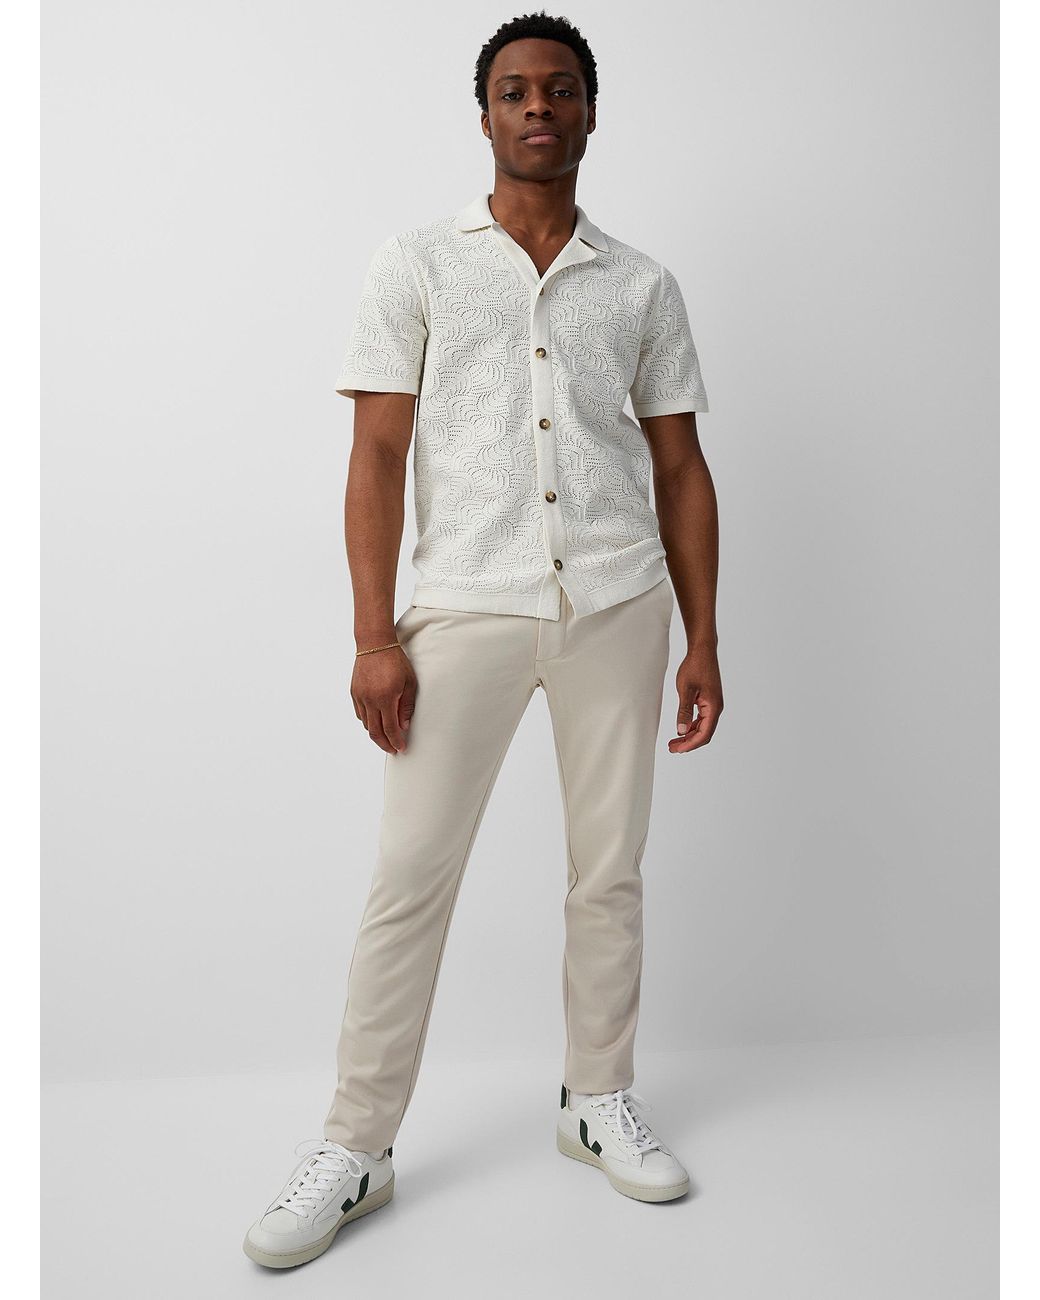 Only & Sons Mark Knit Pant Slim Fit in White for Men